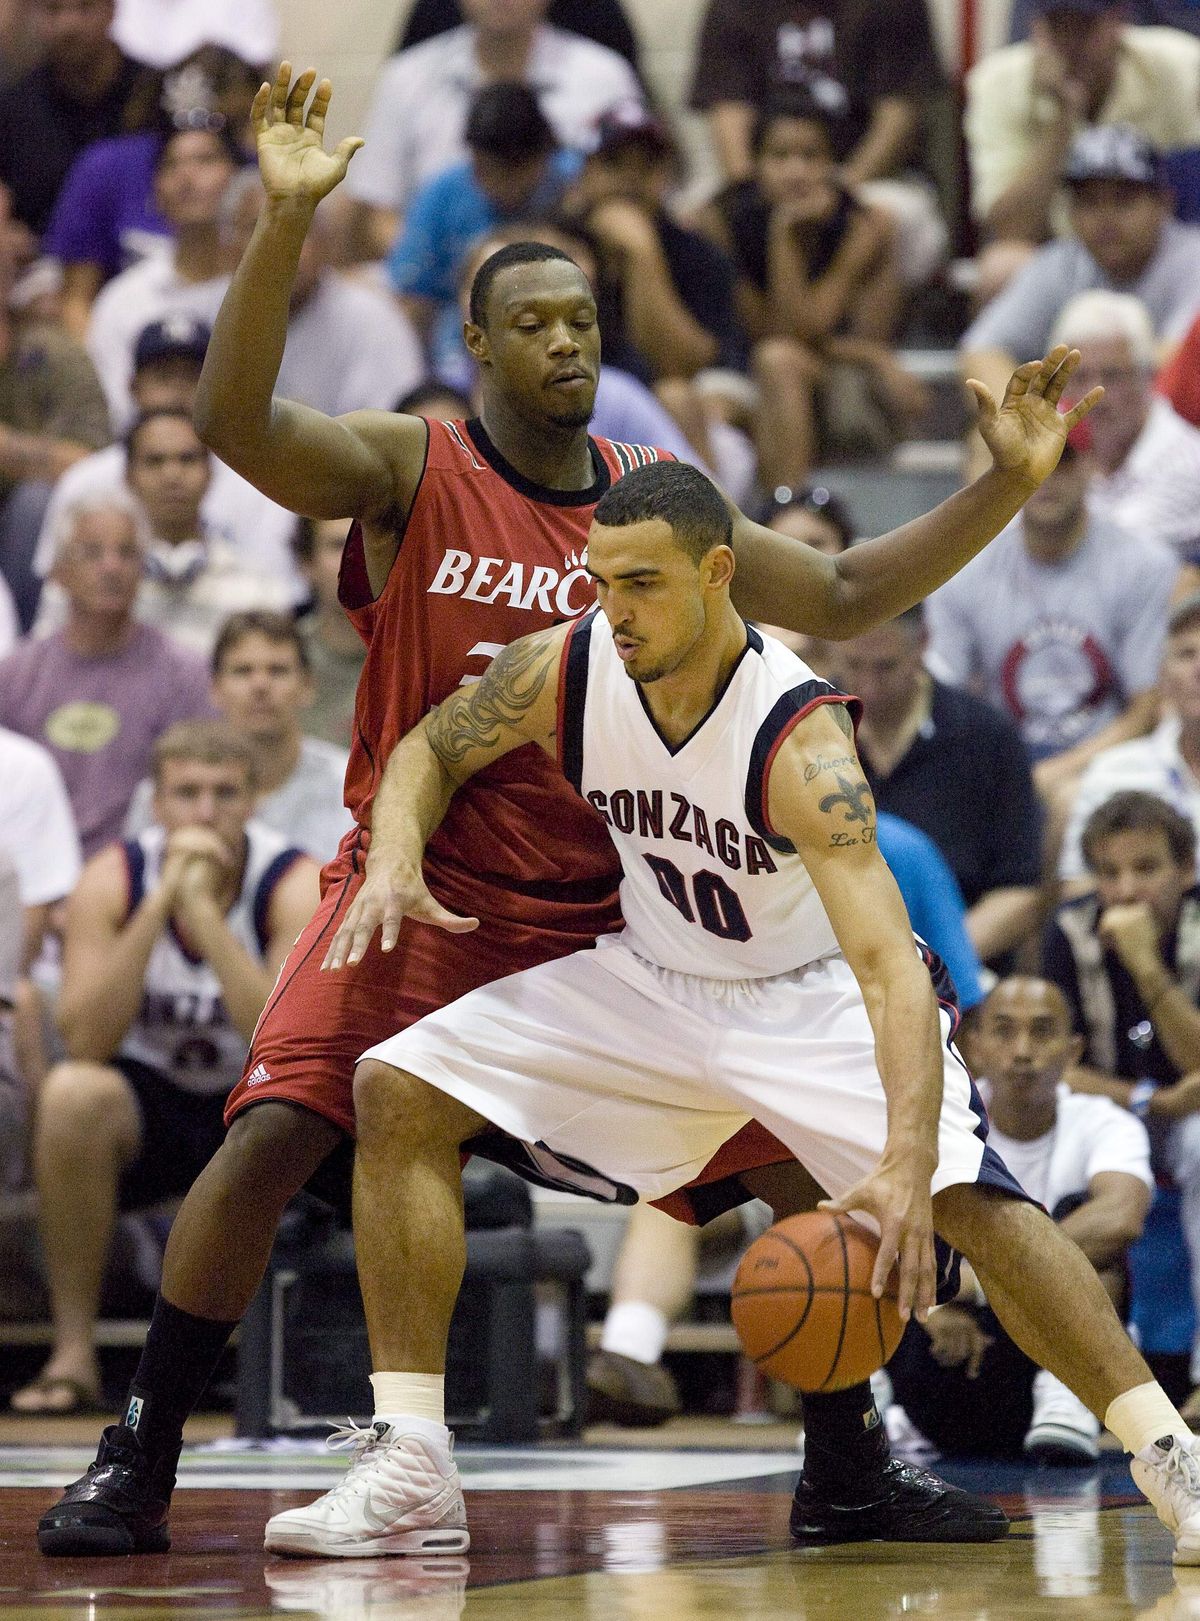 Cincinnati forward Yancy Gates guards Gonzaga center Robert Sacre (00) in the first half of an NCAA college basketball game Wednesday Nov. 25, 2009, at the Maui Invitational in Lahaina, Hawaii. (Eugene Tanner / Associated Press)